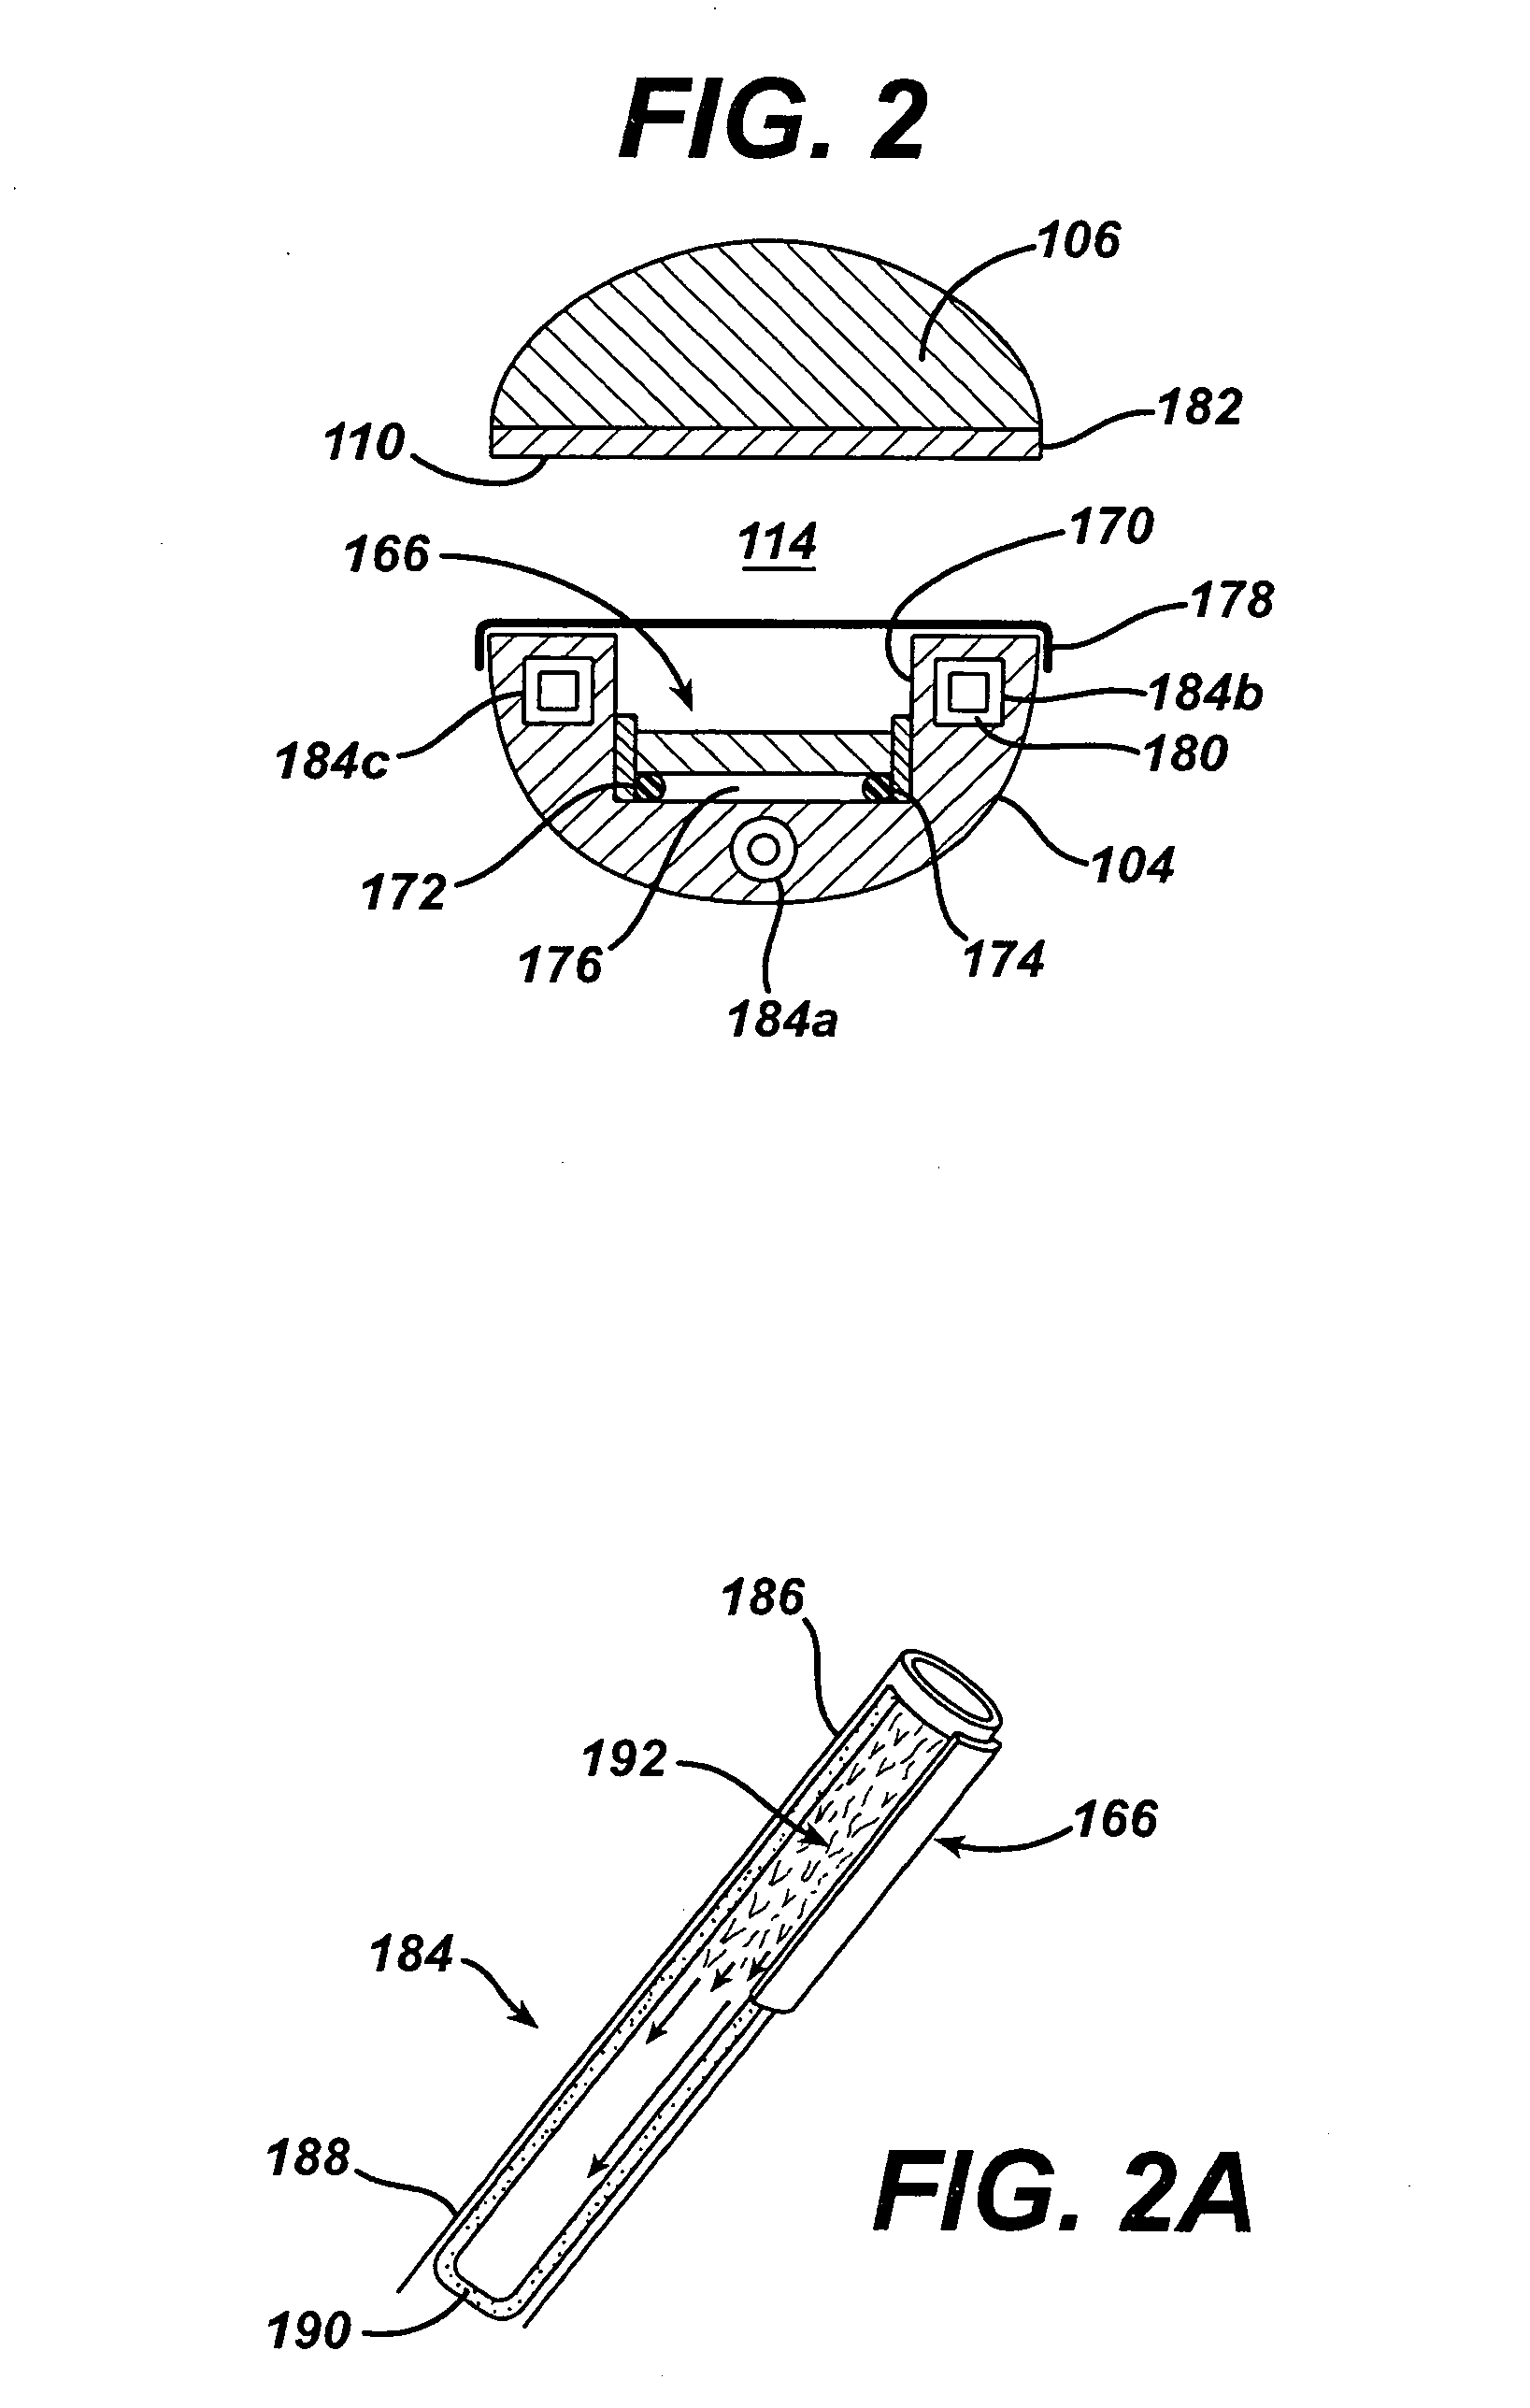 High intensity ablation device